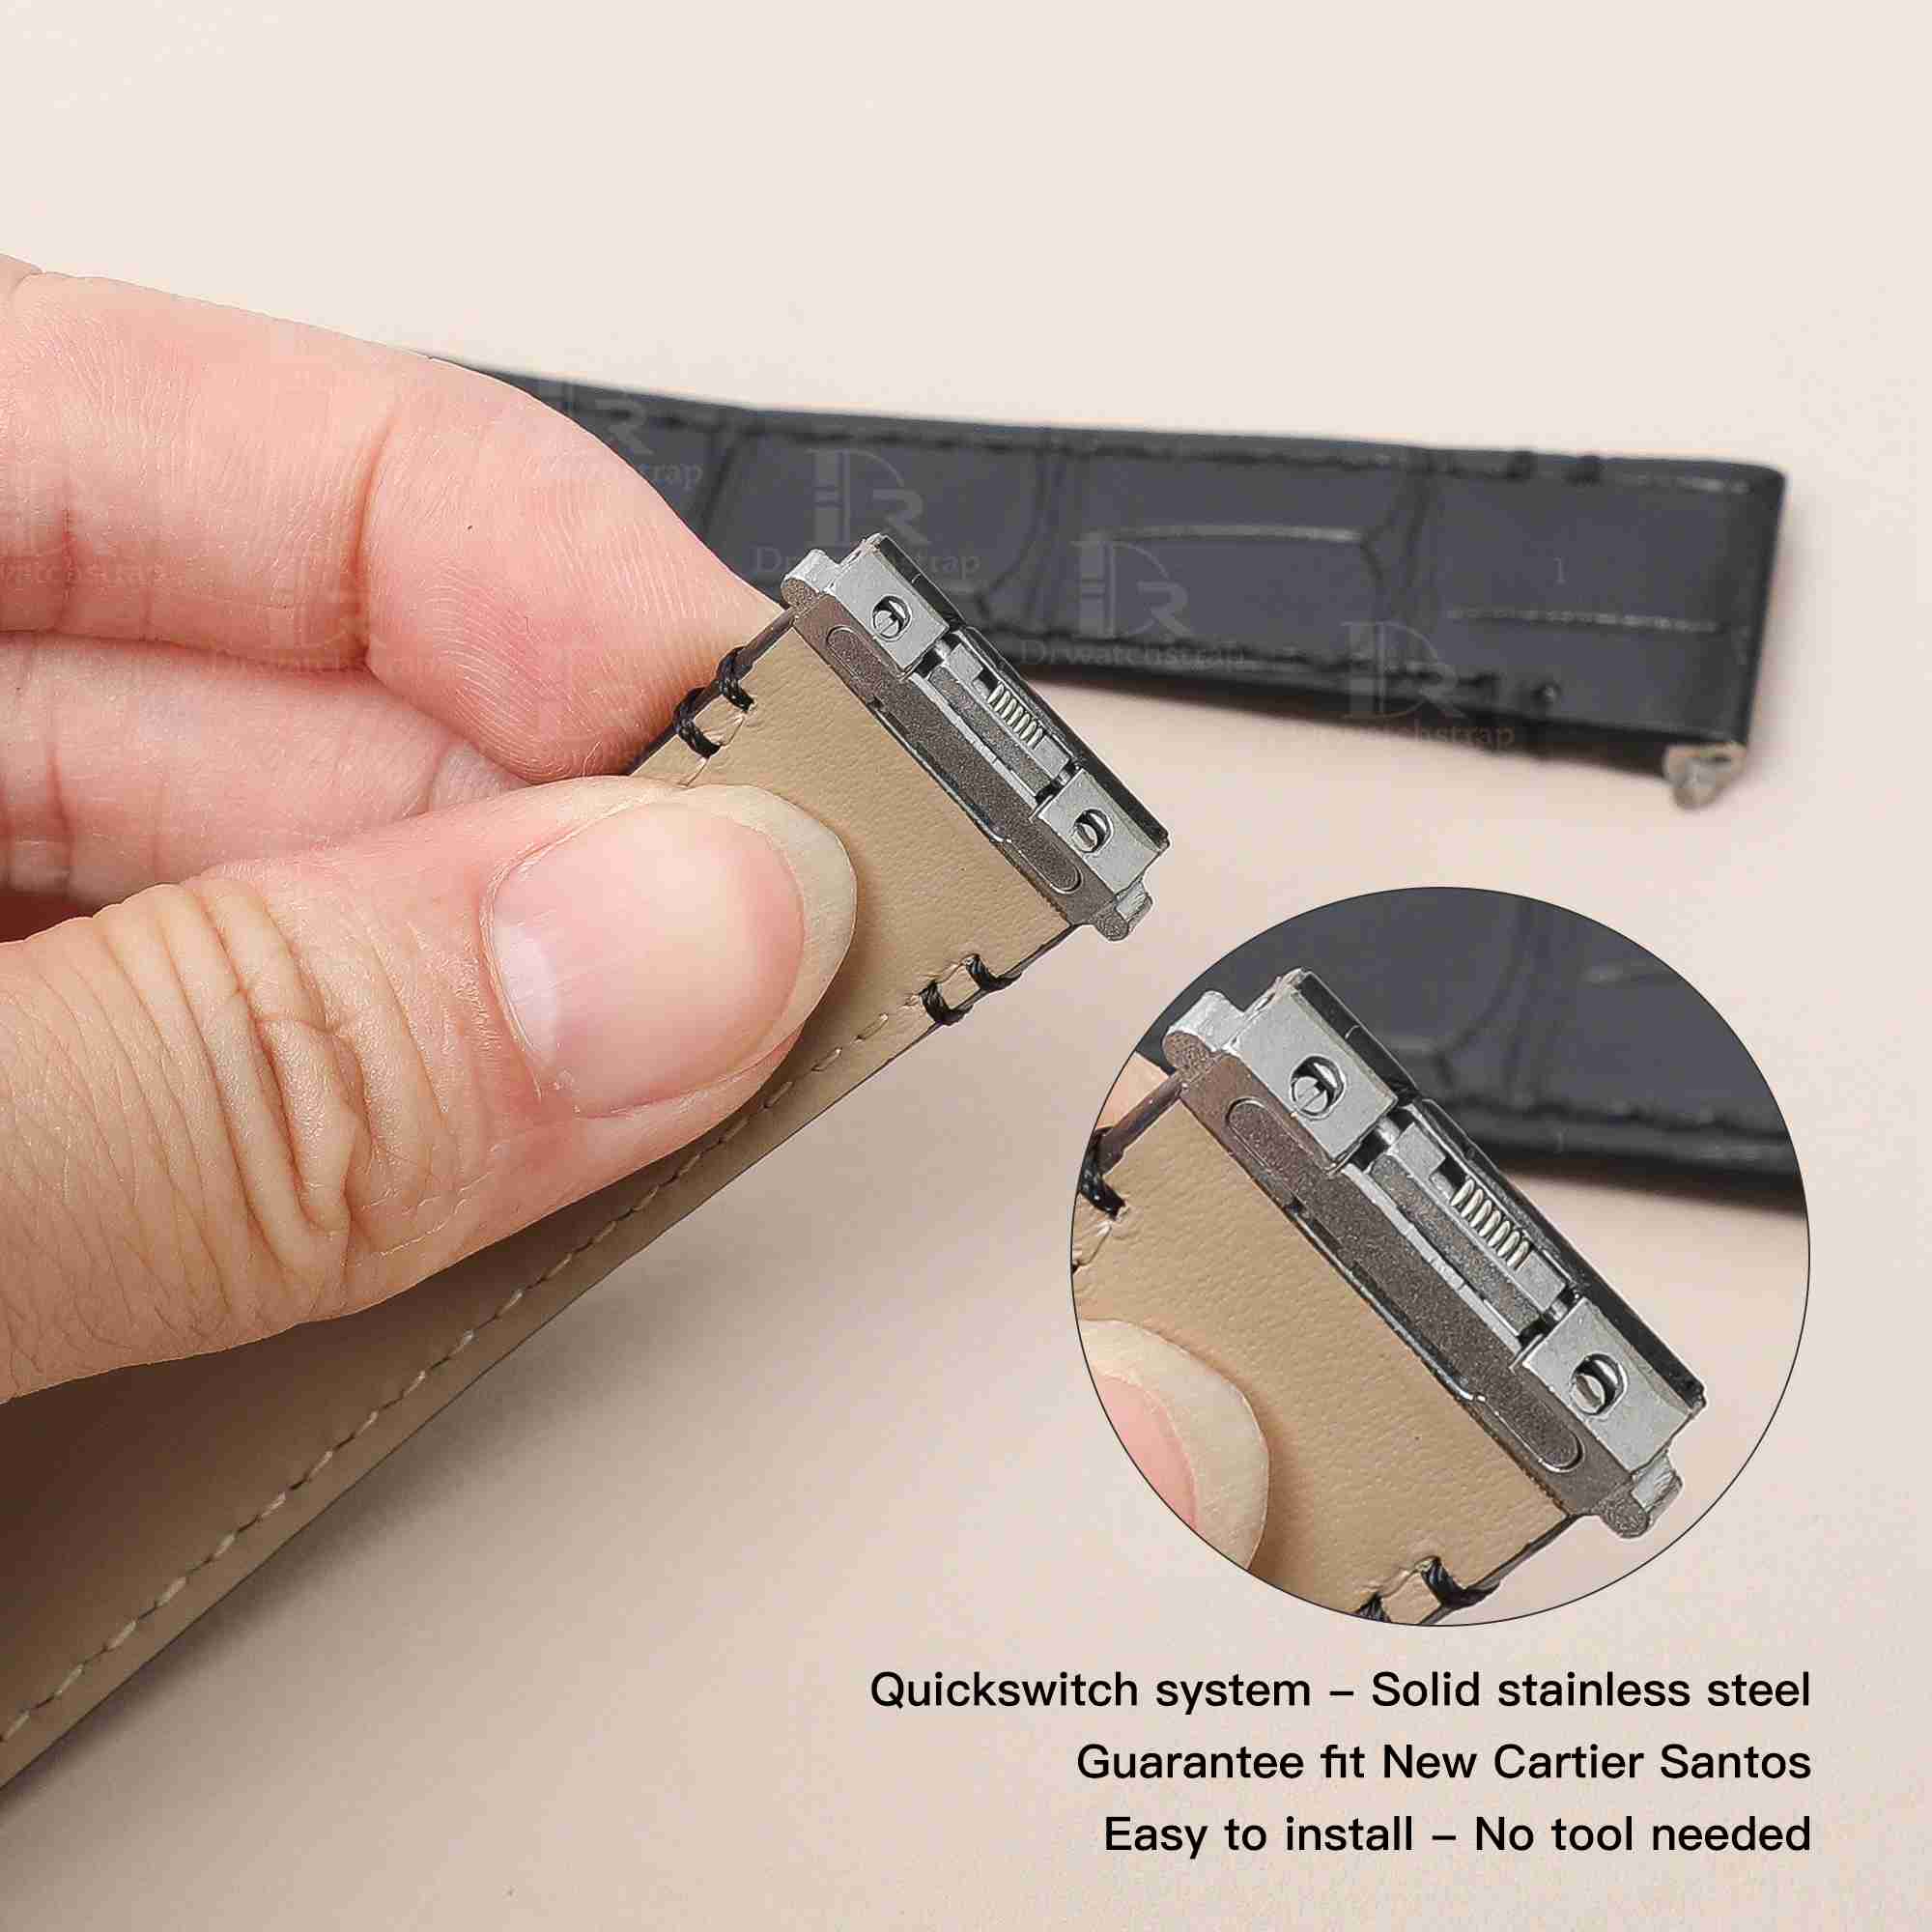 Genuine best quality replacement Grade American Alligator Quickswitch Black leather Cartier Santos watch straps & watchbands for Cartier Santos 100 L XL watches for sale - Grade A crocodile custom leather watchband with interchangeable system online at low price